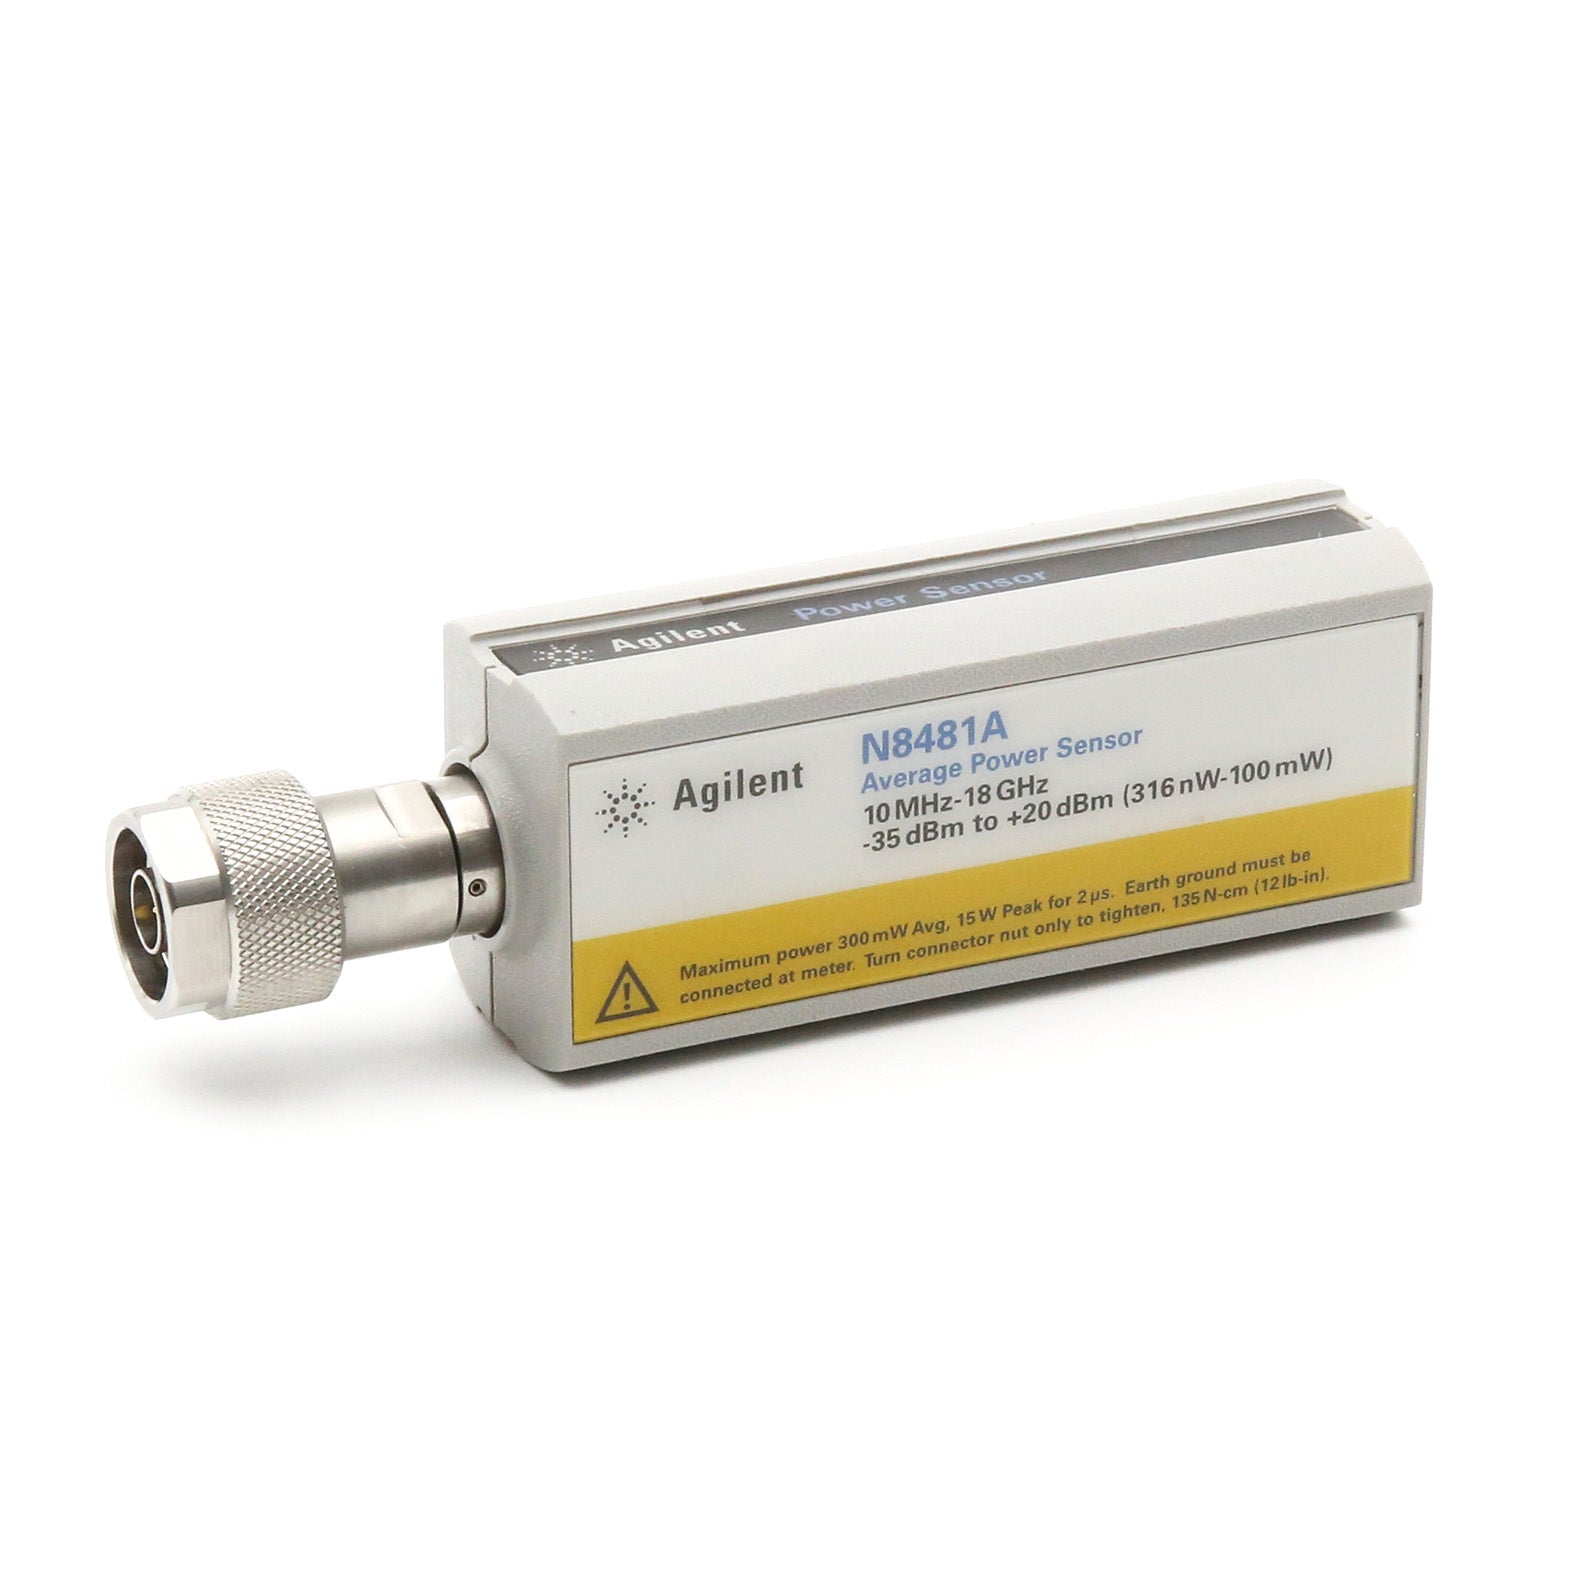 10%OFF[DW]USED 8日保証 Agilent N8481A Average Power Sensor パワーセンサー OPT 1A7 10MHz-18GHz ソフトウェア[ST03815-0027] その他